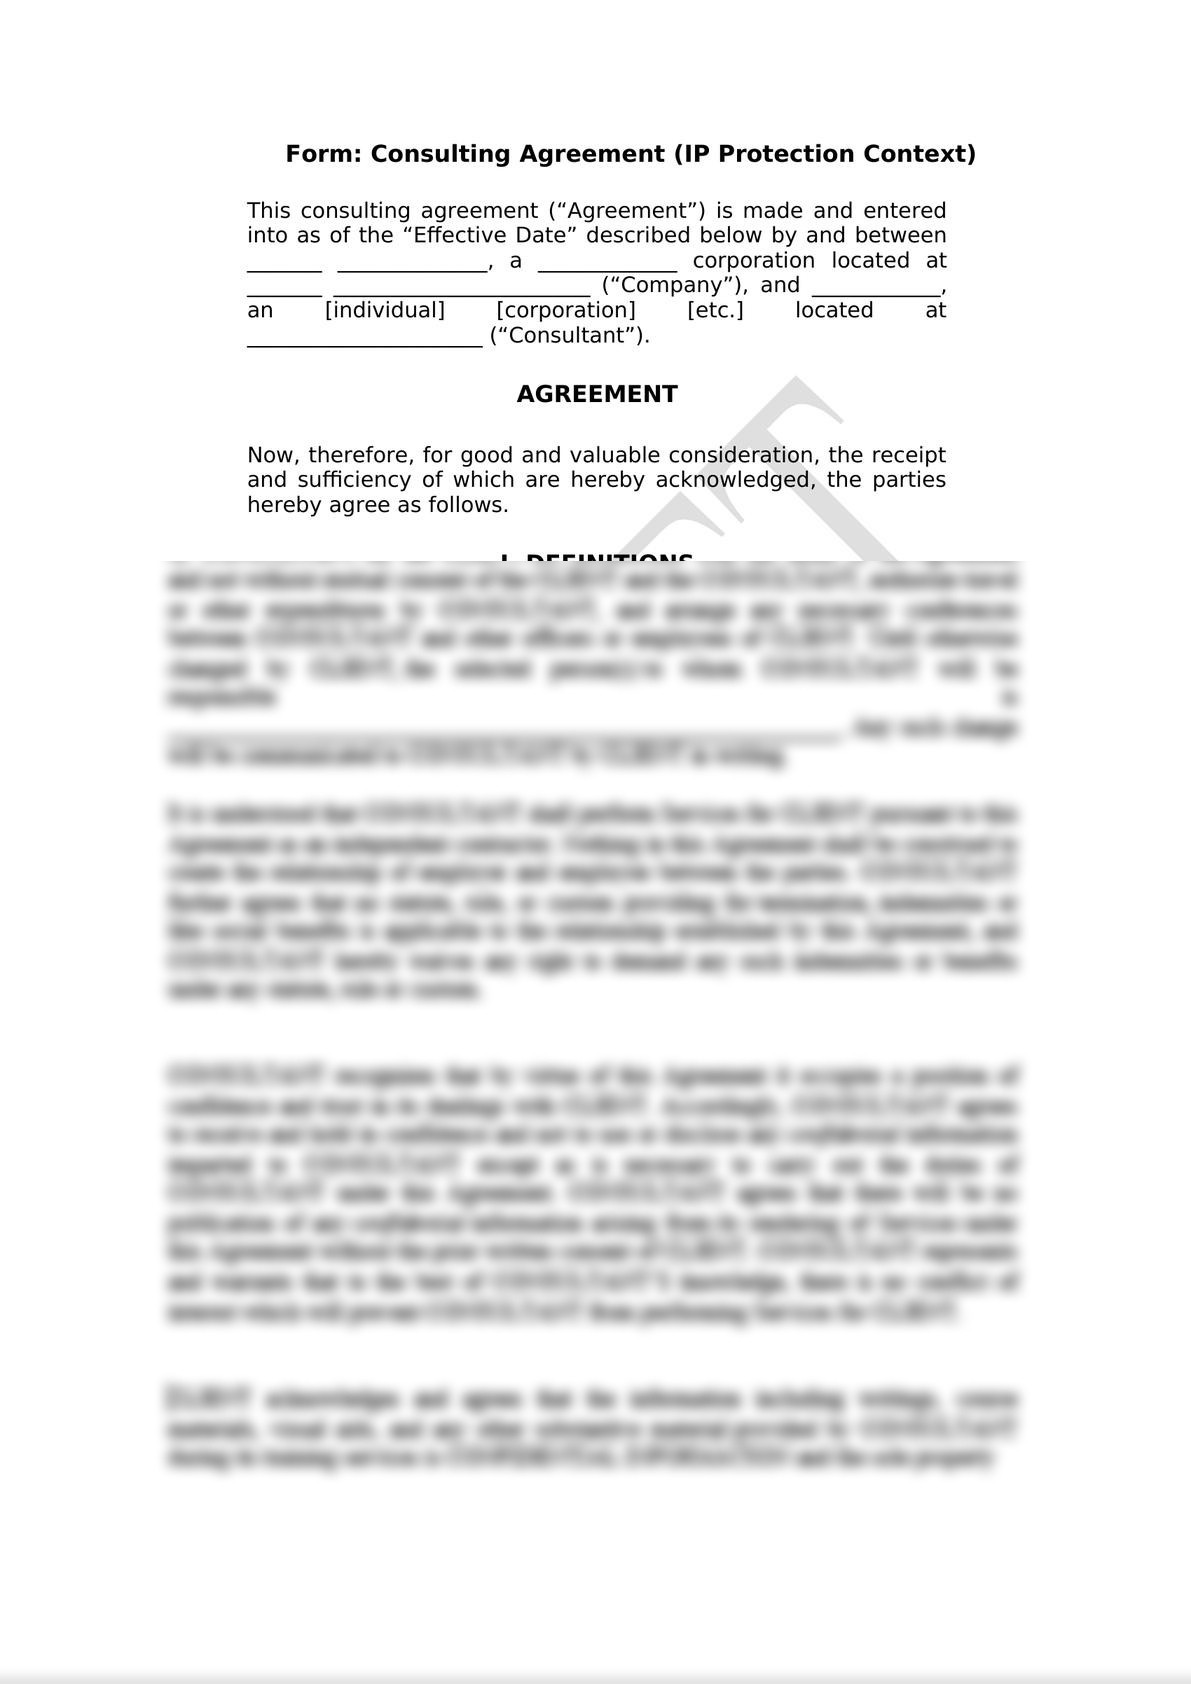 Consulting Agreement (IP Context)-0